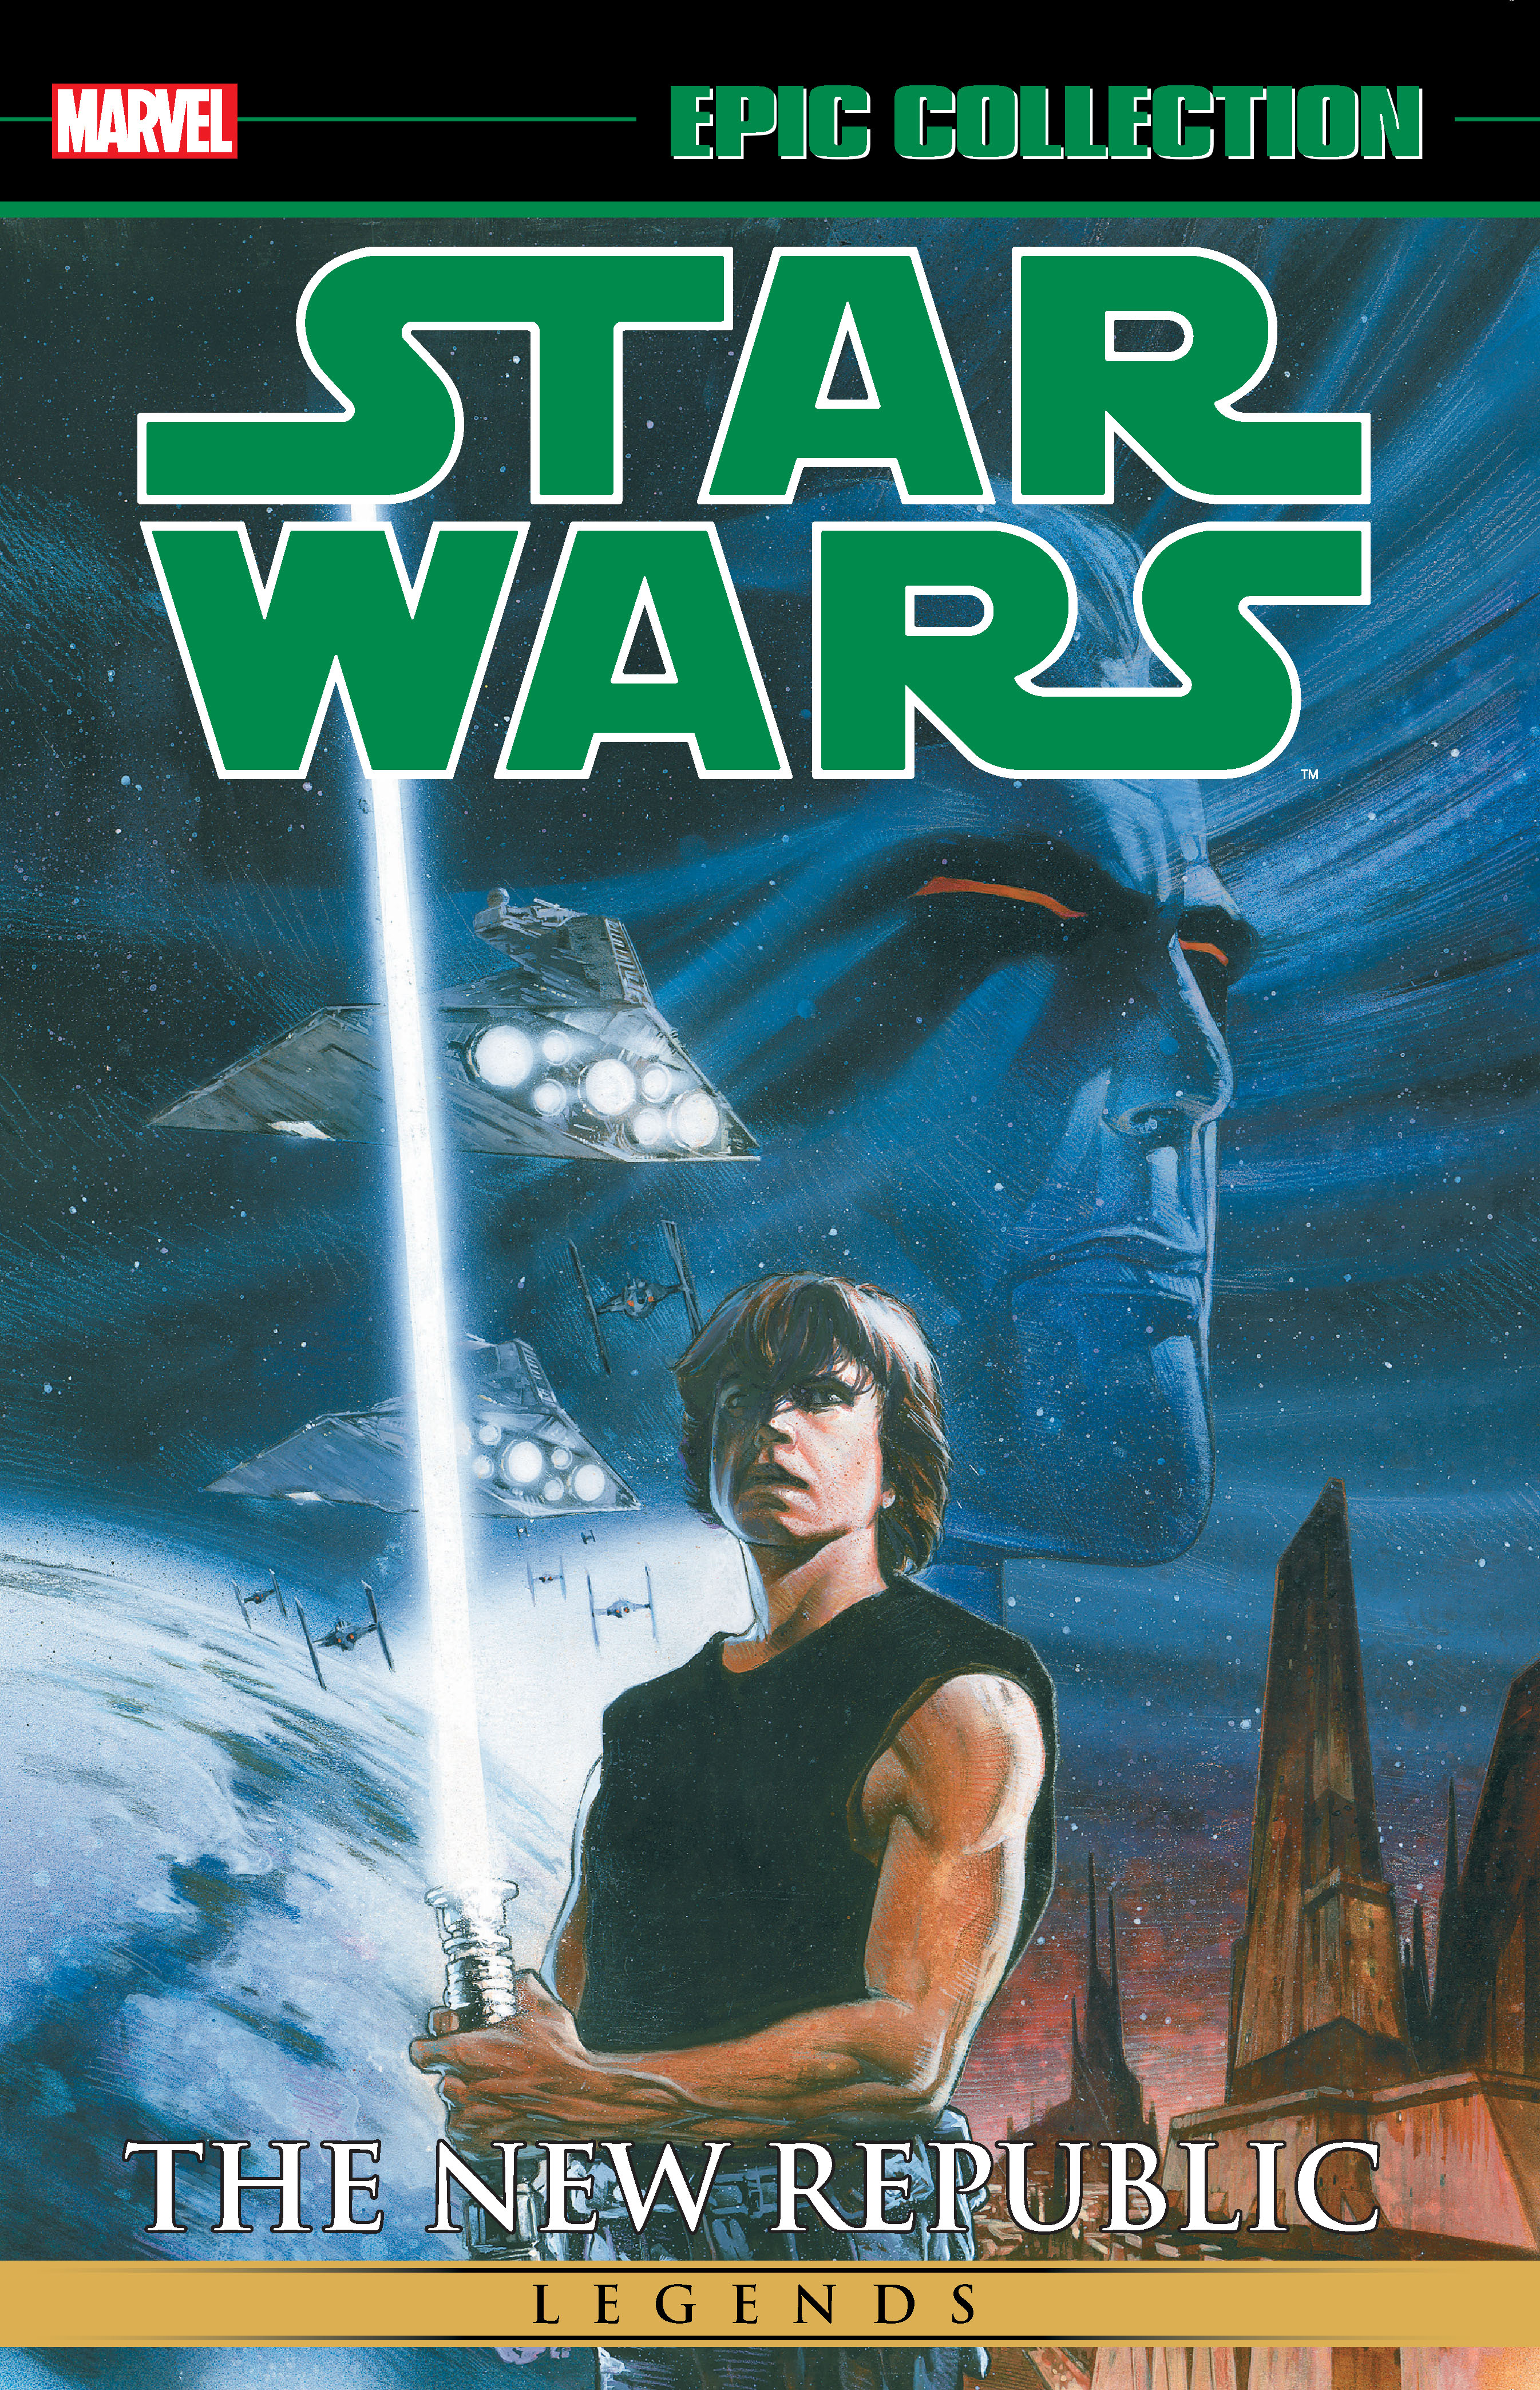 Star Wars Legends Epic Collection: The New Republic Vol. 4 (Trade Paperback)